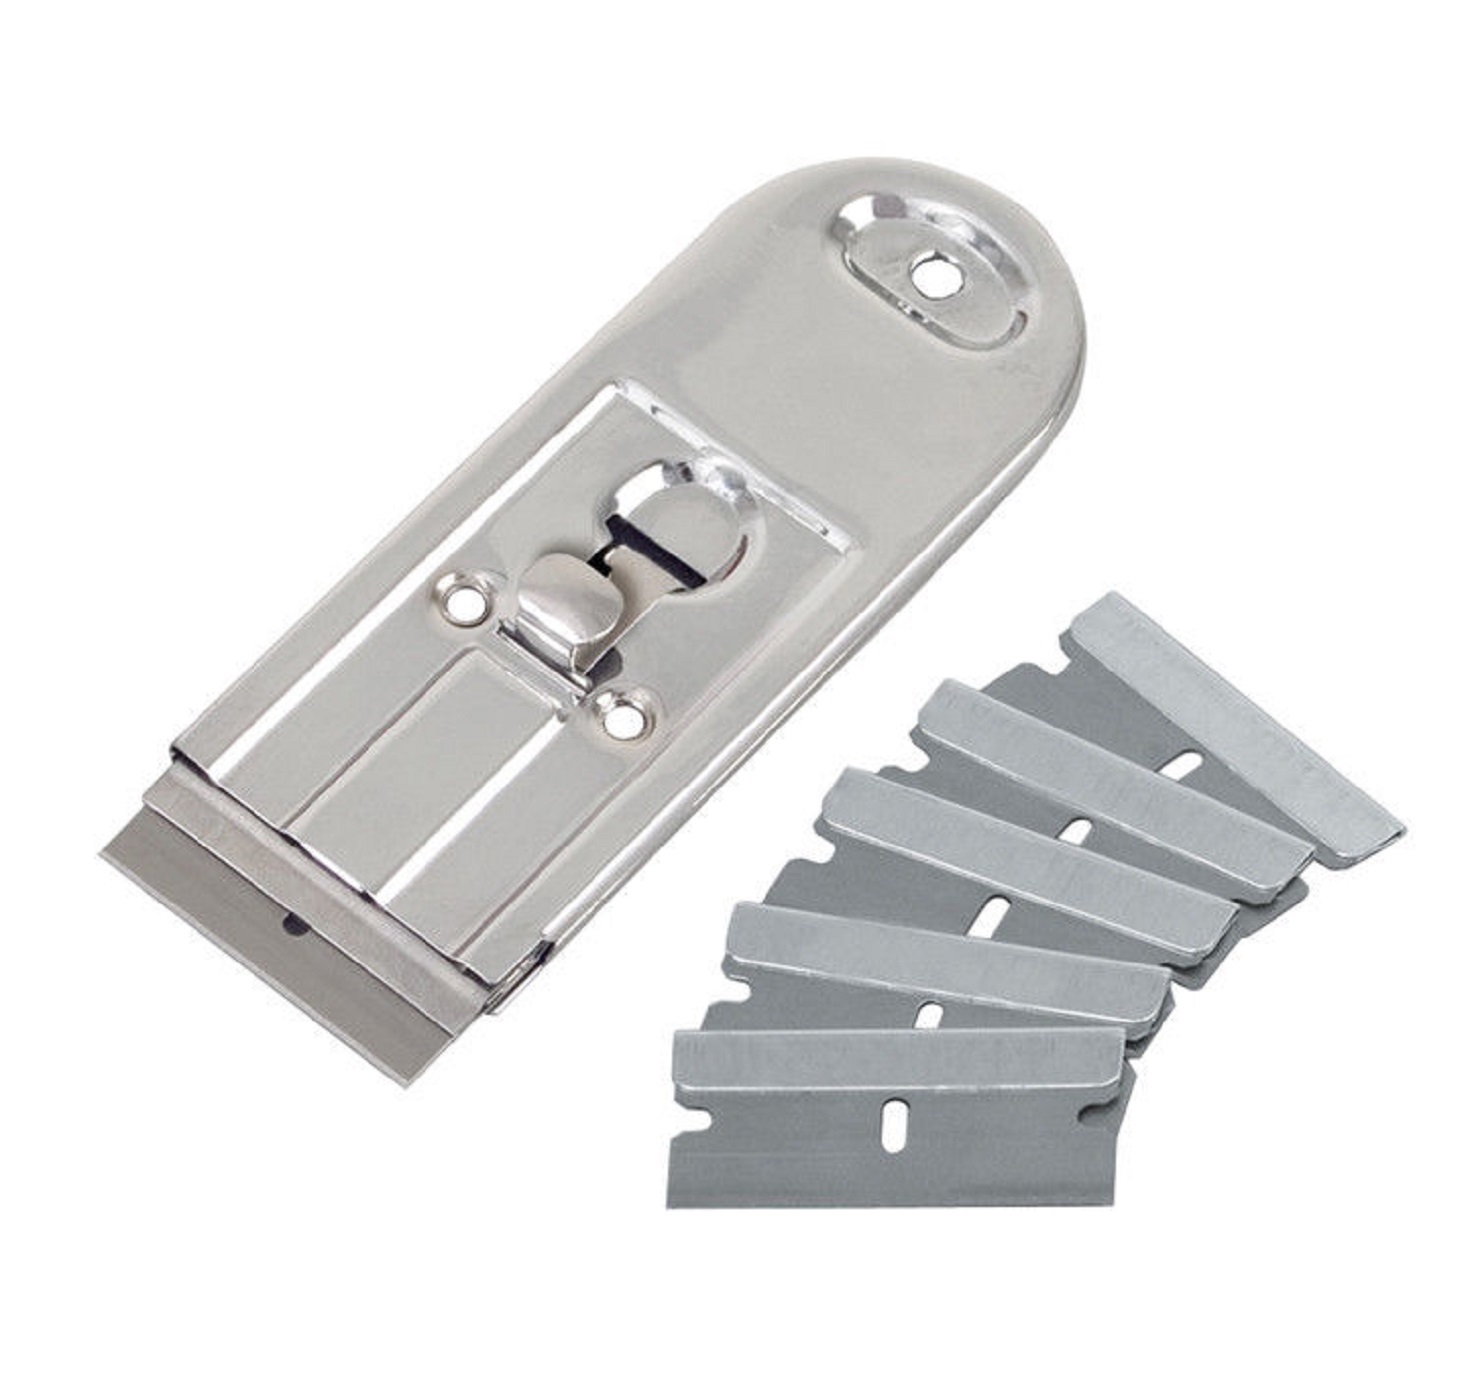 All Steel Retractable Safety Scraper with 5 Single Edge Steel Blades